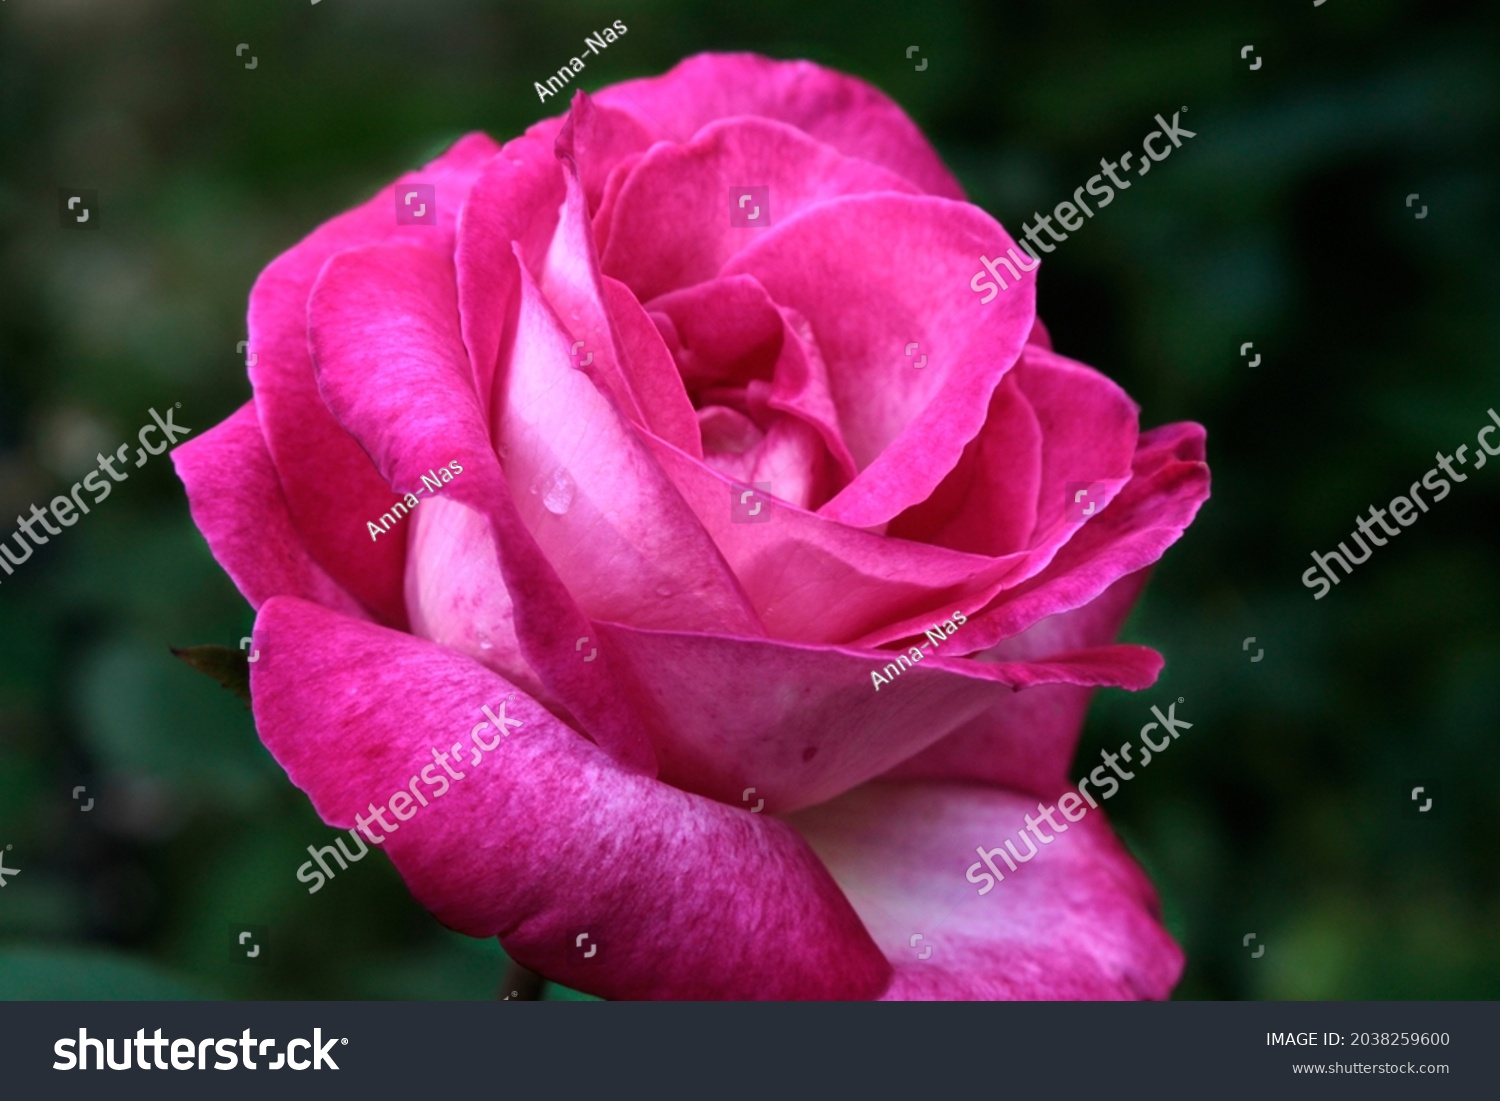 Close-up of a pink rose on a dark green background. High quality photo #2038259600